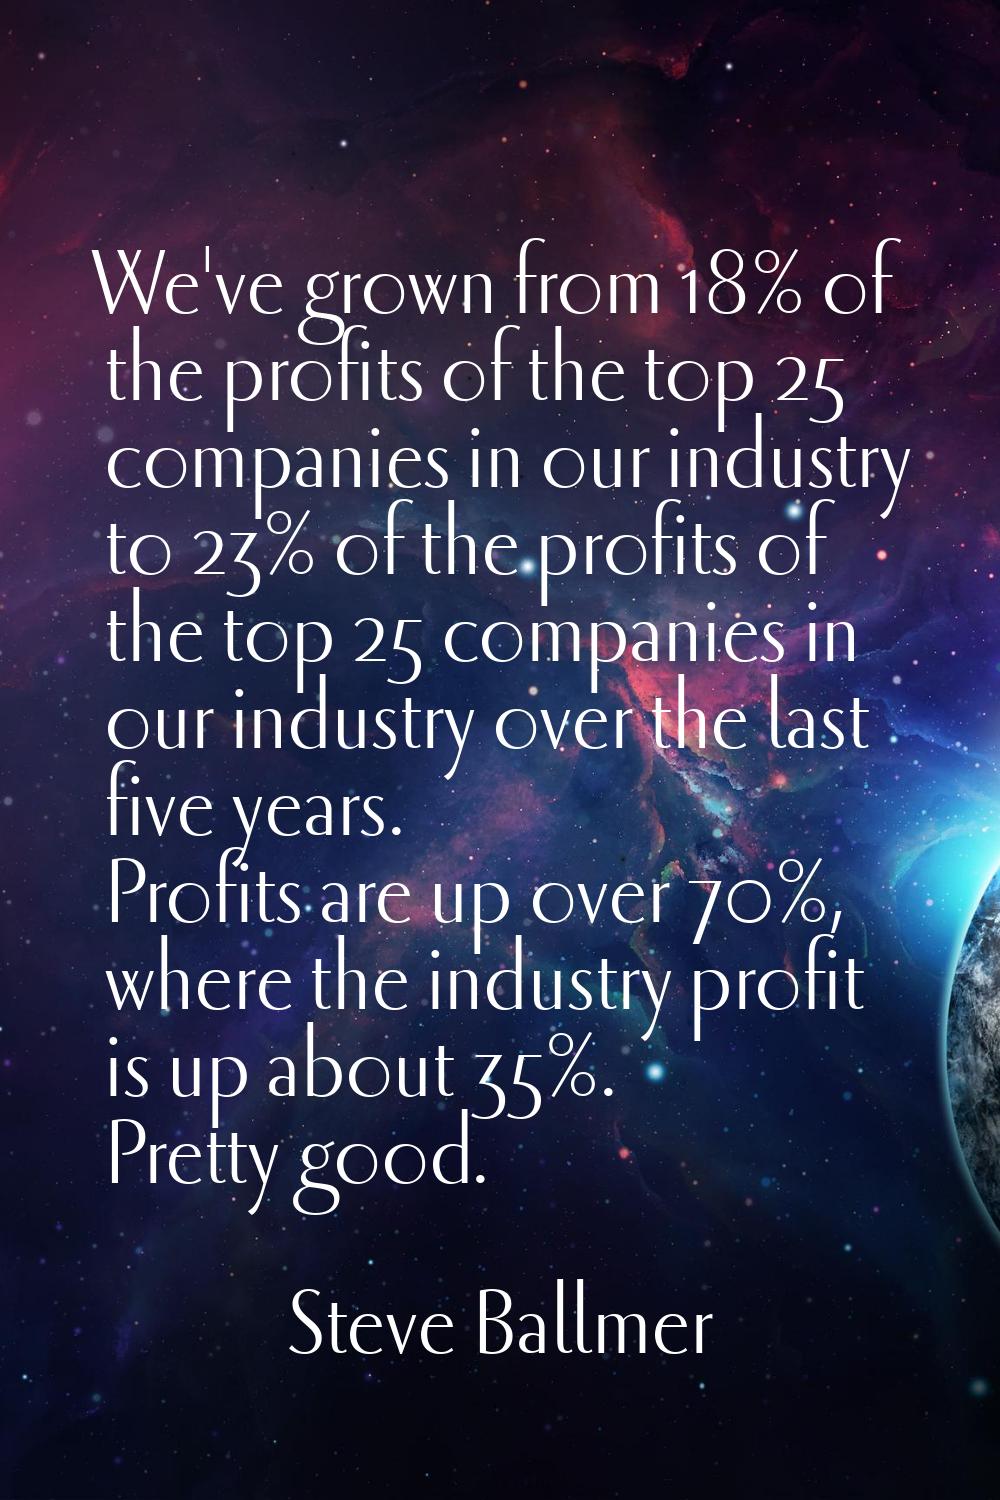 We've grown from 18% of the profits of the top 25 companies in our industry to 23% of the profits o